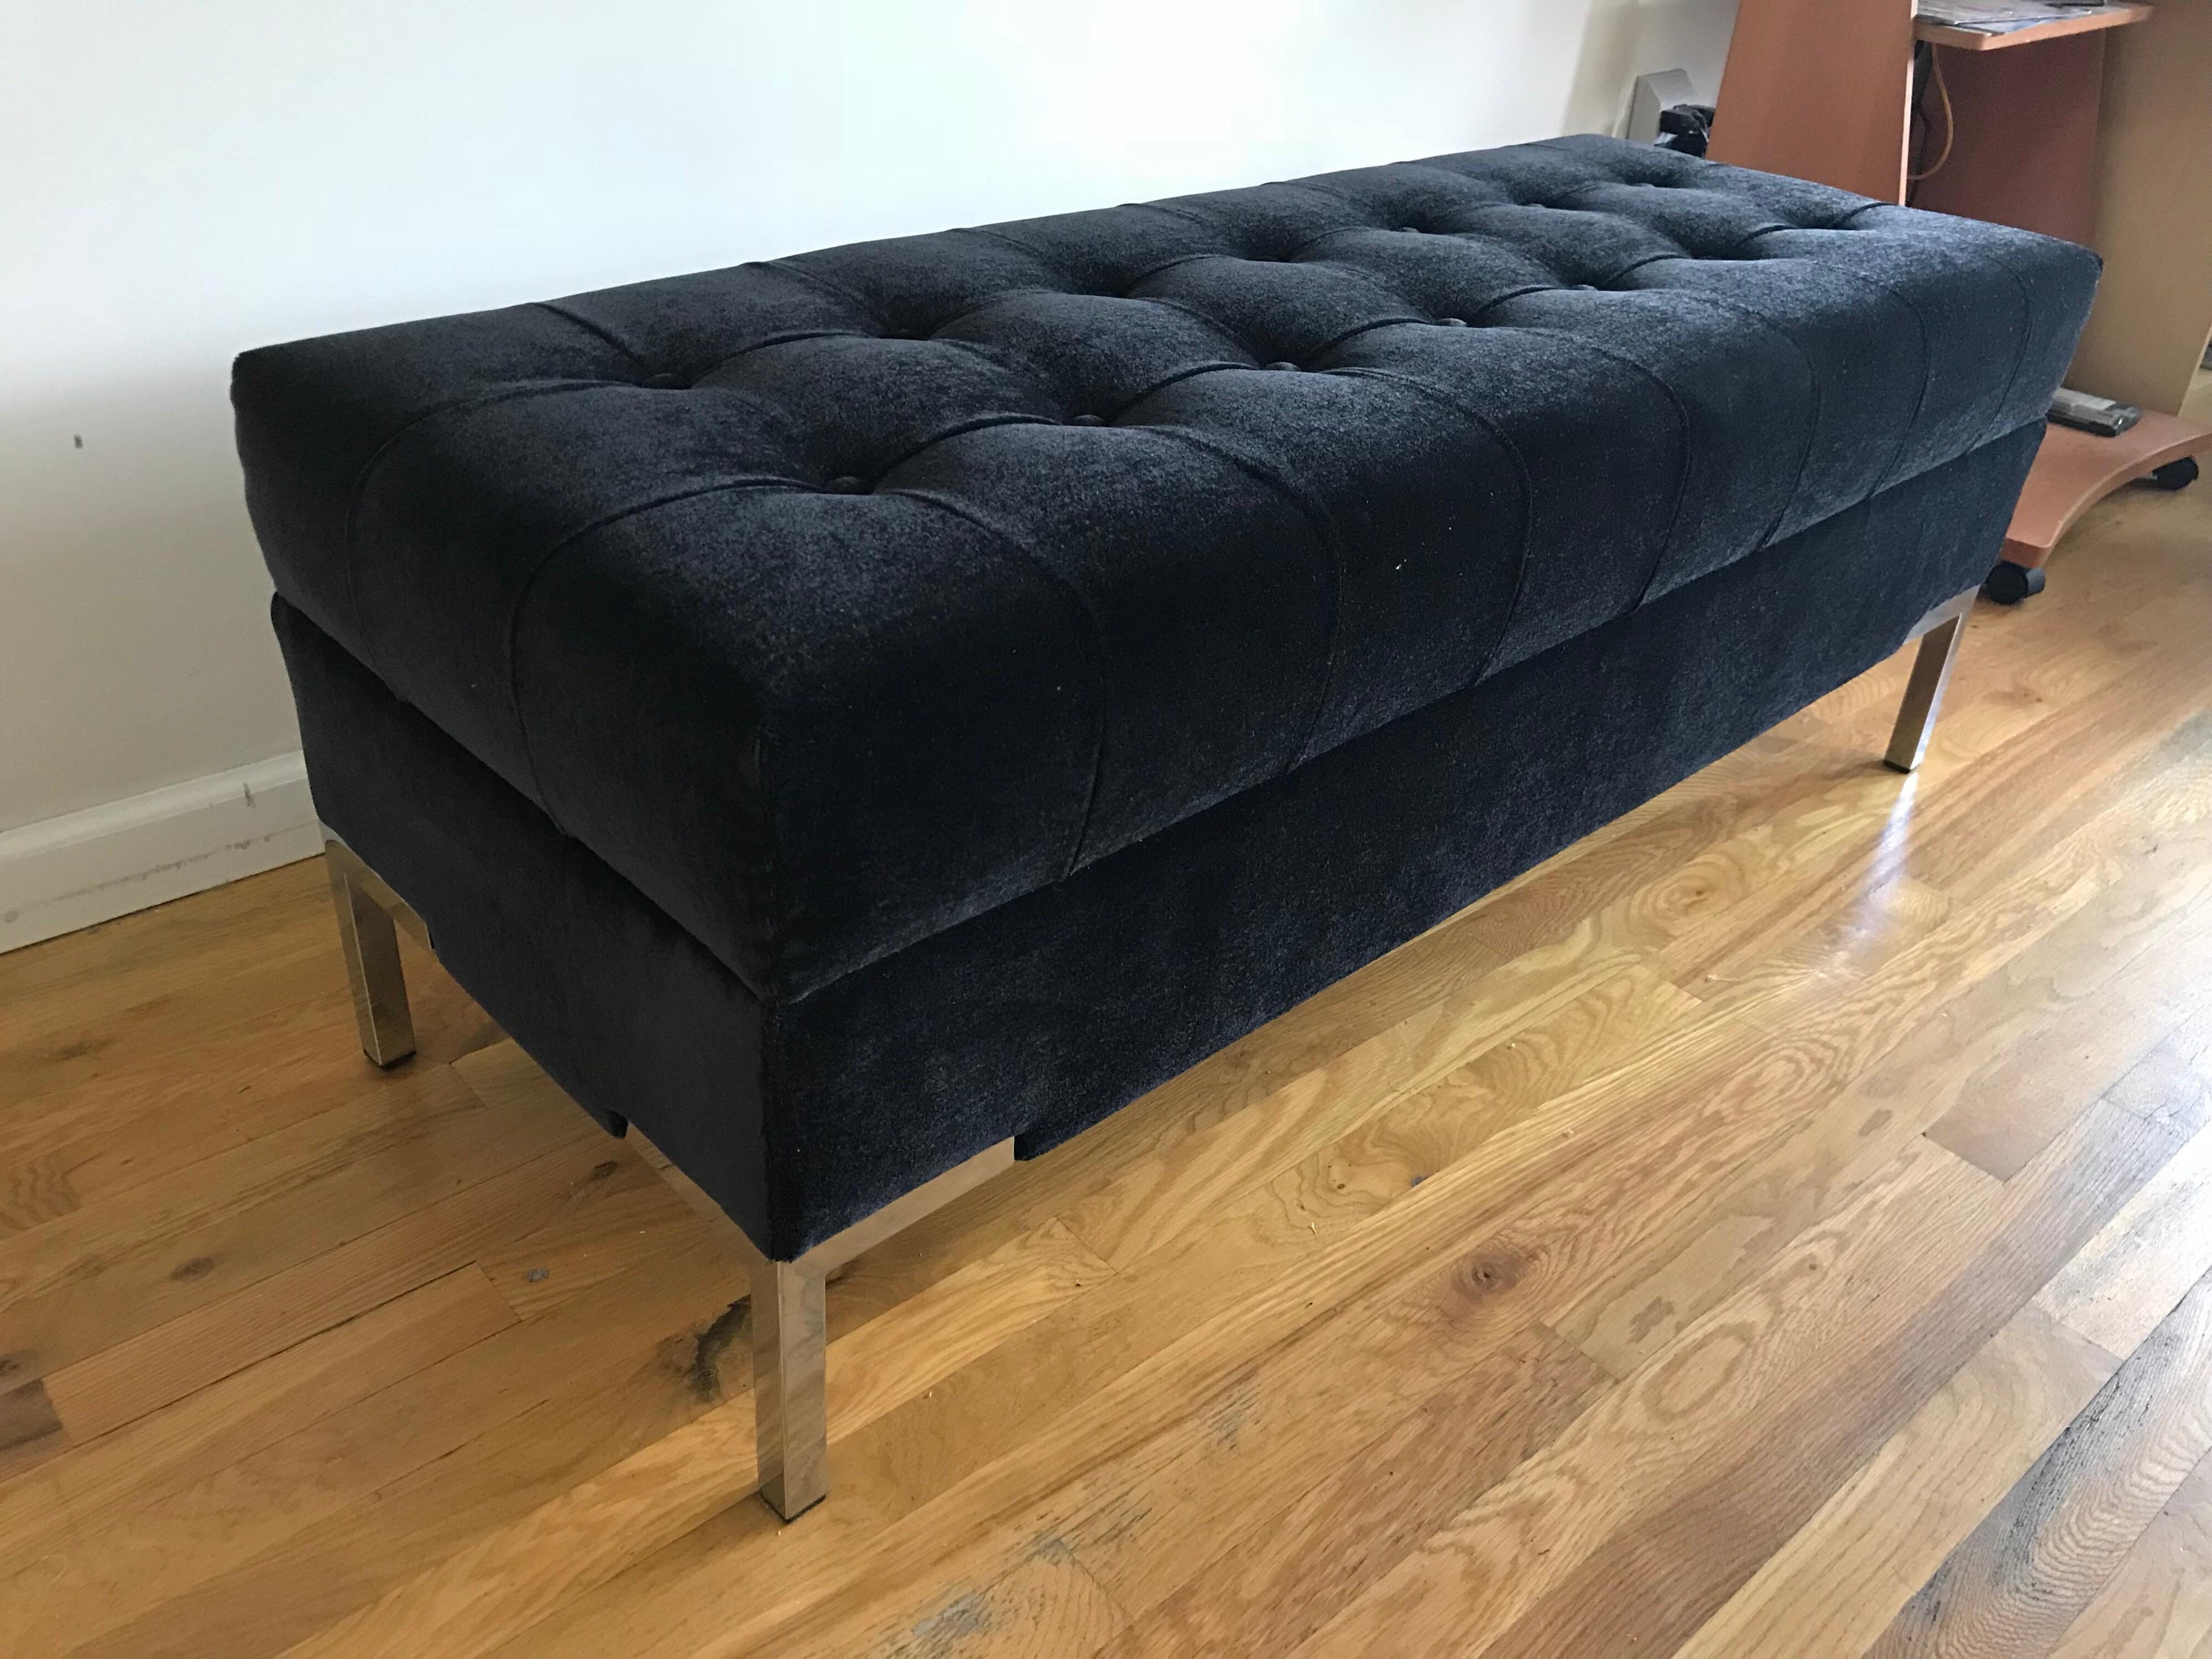 Custom integrated leg Mondrian bench, shown in rich charcoal mohair, with buttons and seaming. Available in any size custom-made to order COM / COL. Legs can be brass, nickel or chrome or any powder coat color can be bought in pairs or as a single.